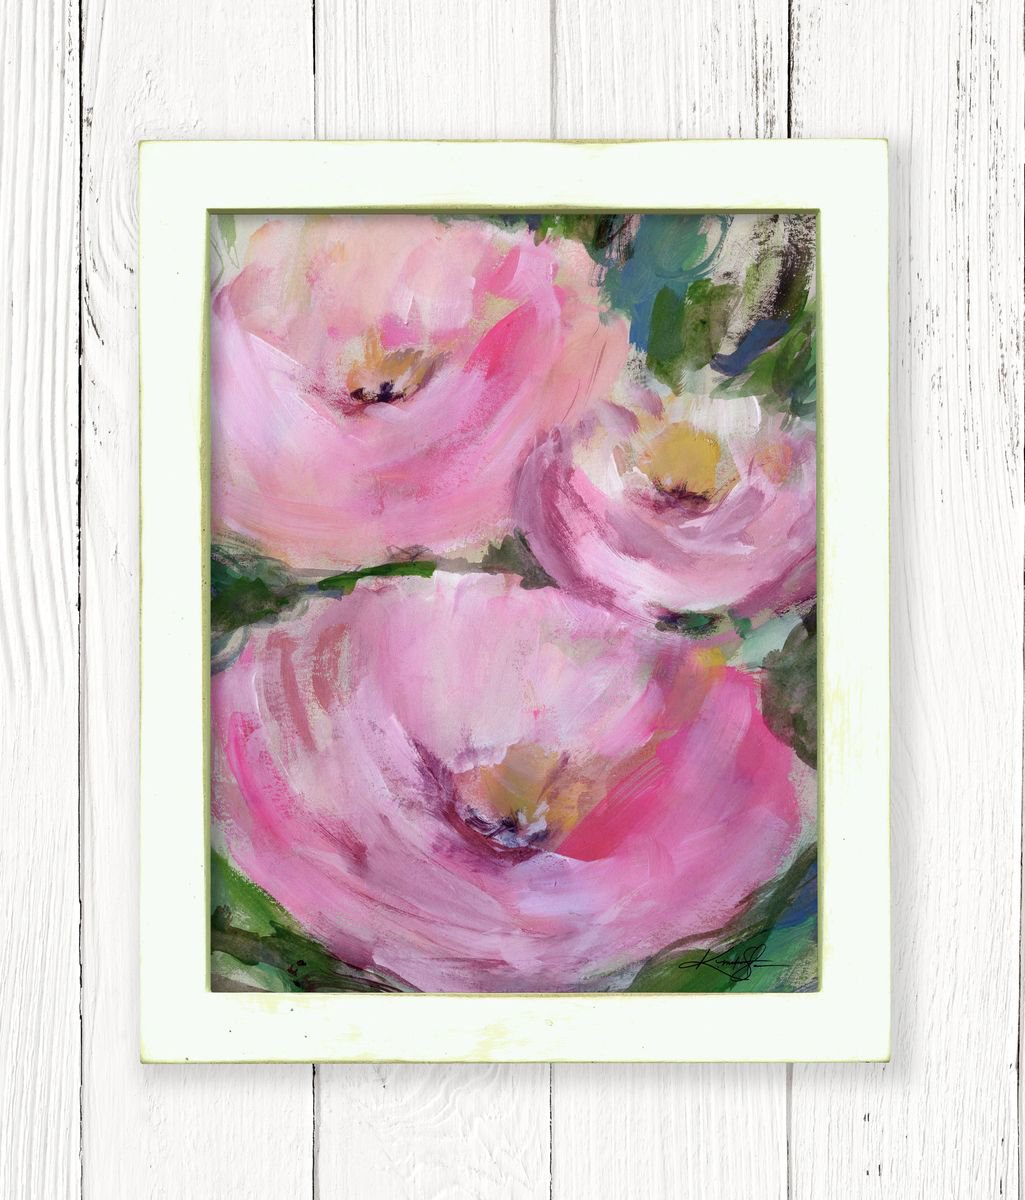 Shabby Chic Charm 21 - Framed Floral art in Painted Distressed Frame by Kathy Morton Stani... by Kathy Morton Stanion